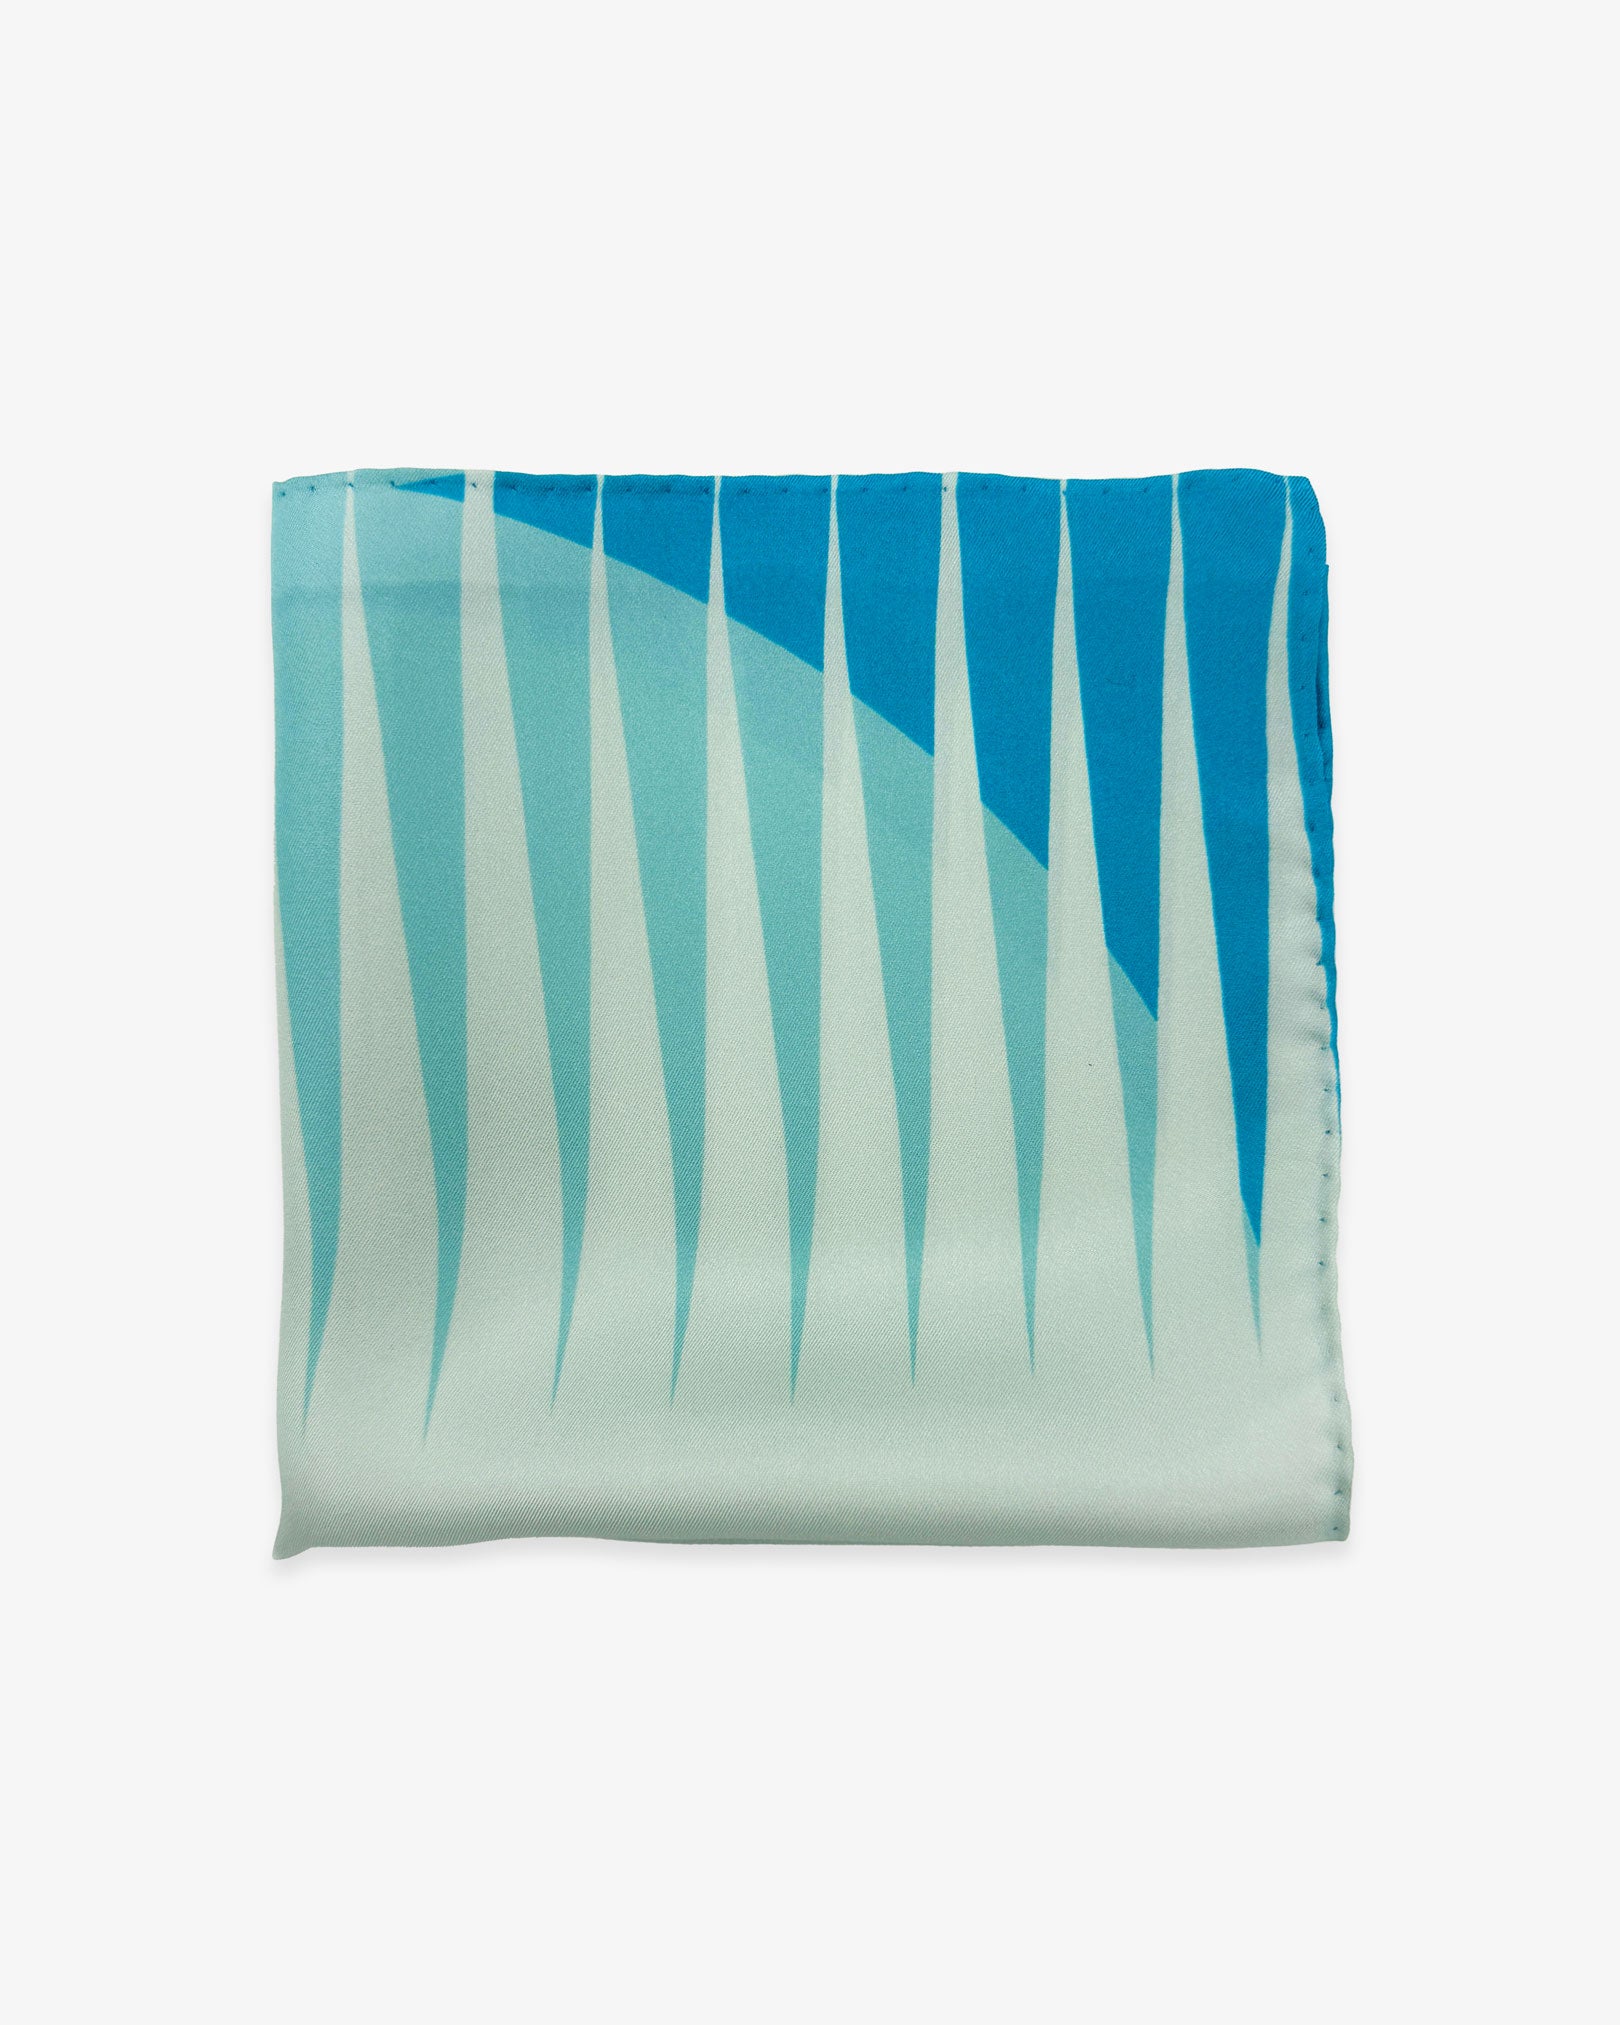 The 'Hamburg' silk pocket square from SOHO Scarves folded into a quarter, showing a portion of the bauhaus-inspired triangular and circular forms in a cool palette.